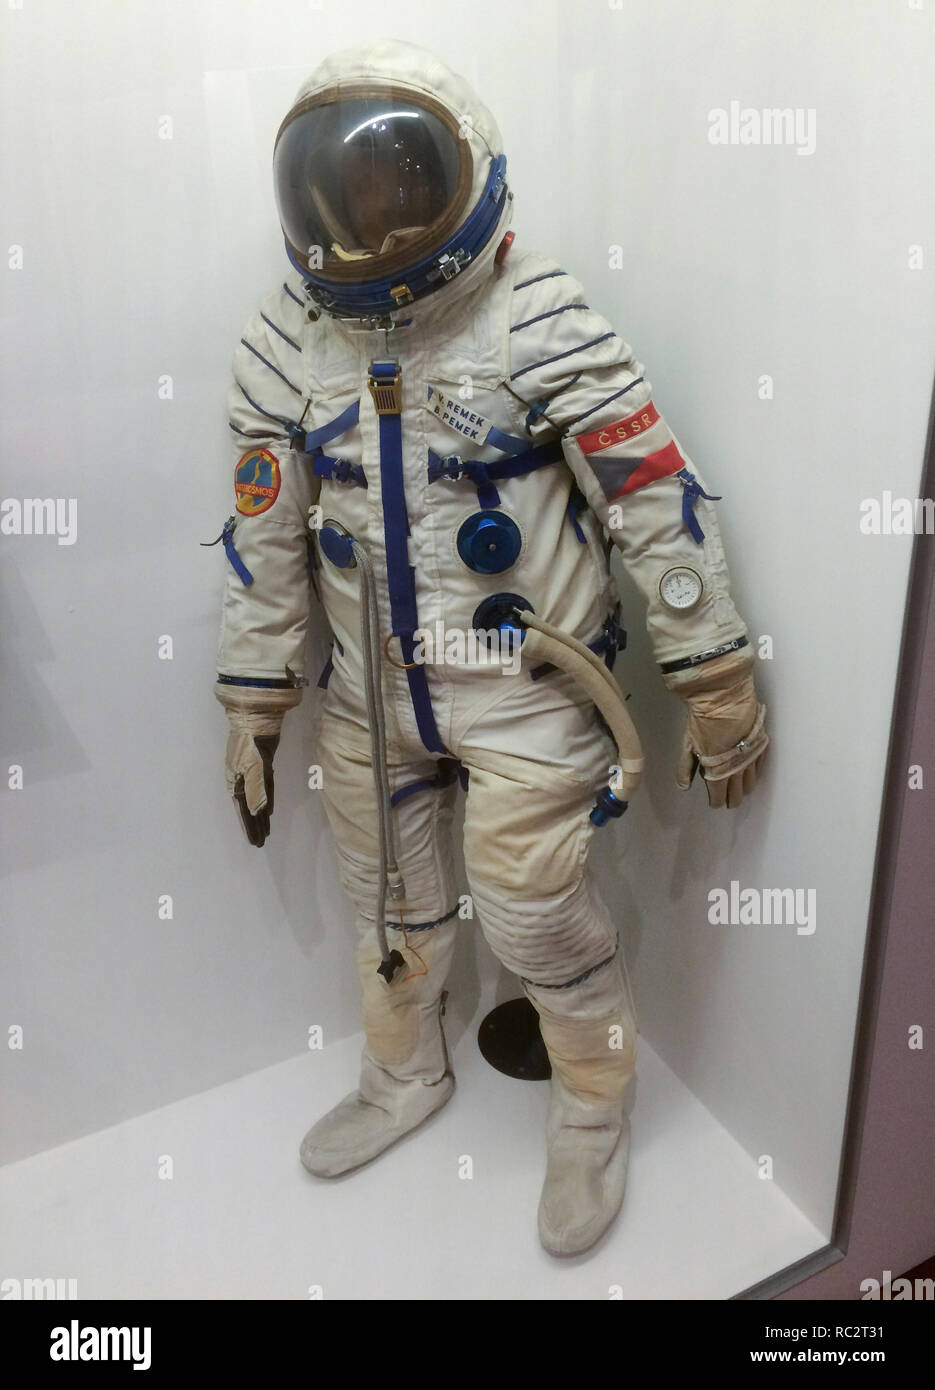 Soviet spacesuit used by Czechoslovak cosmonaut Vladimír Remek on display at the exhibition 'Touches of Statehood' in Prague, Czech Republic. The spacesuit was used during the Soyuz 28 manned mission to the Salyut 6 orbiting space station from 2 to 10 March 1978. Vladimír Remek was the first Czechoslovak in space and the only Czechoslovak cosmonaut. The exhibition devoted to the centenary of Czechoslovakia runs till 31 October 2018. Stock Photo